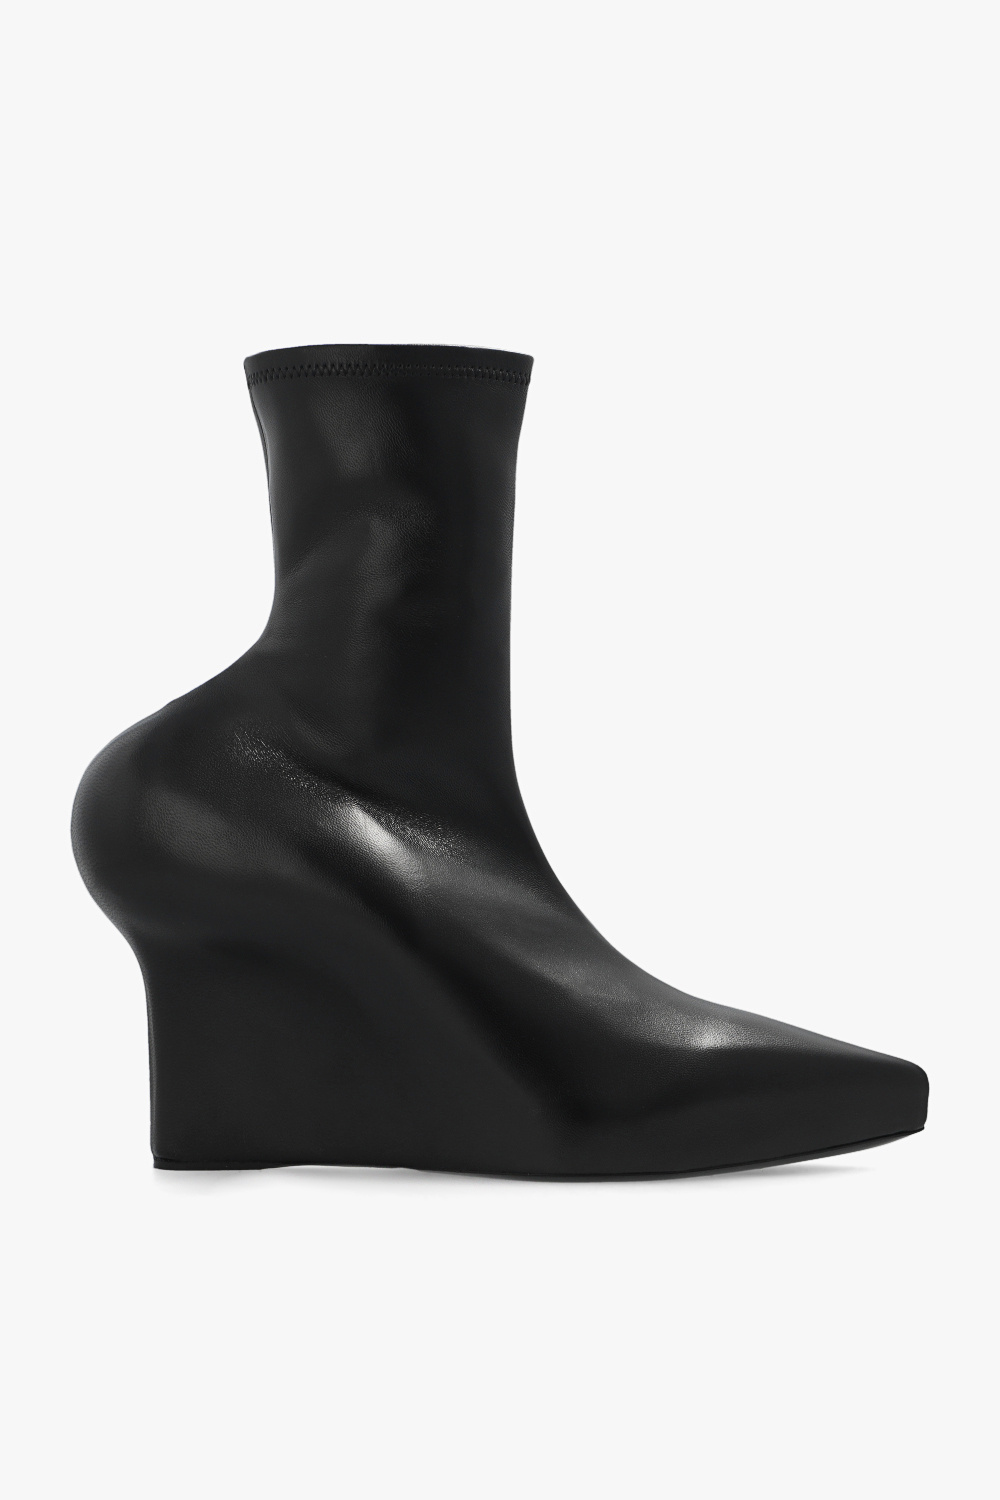 Givenchy Leather wedge boots